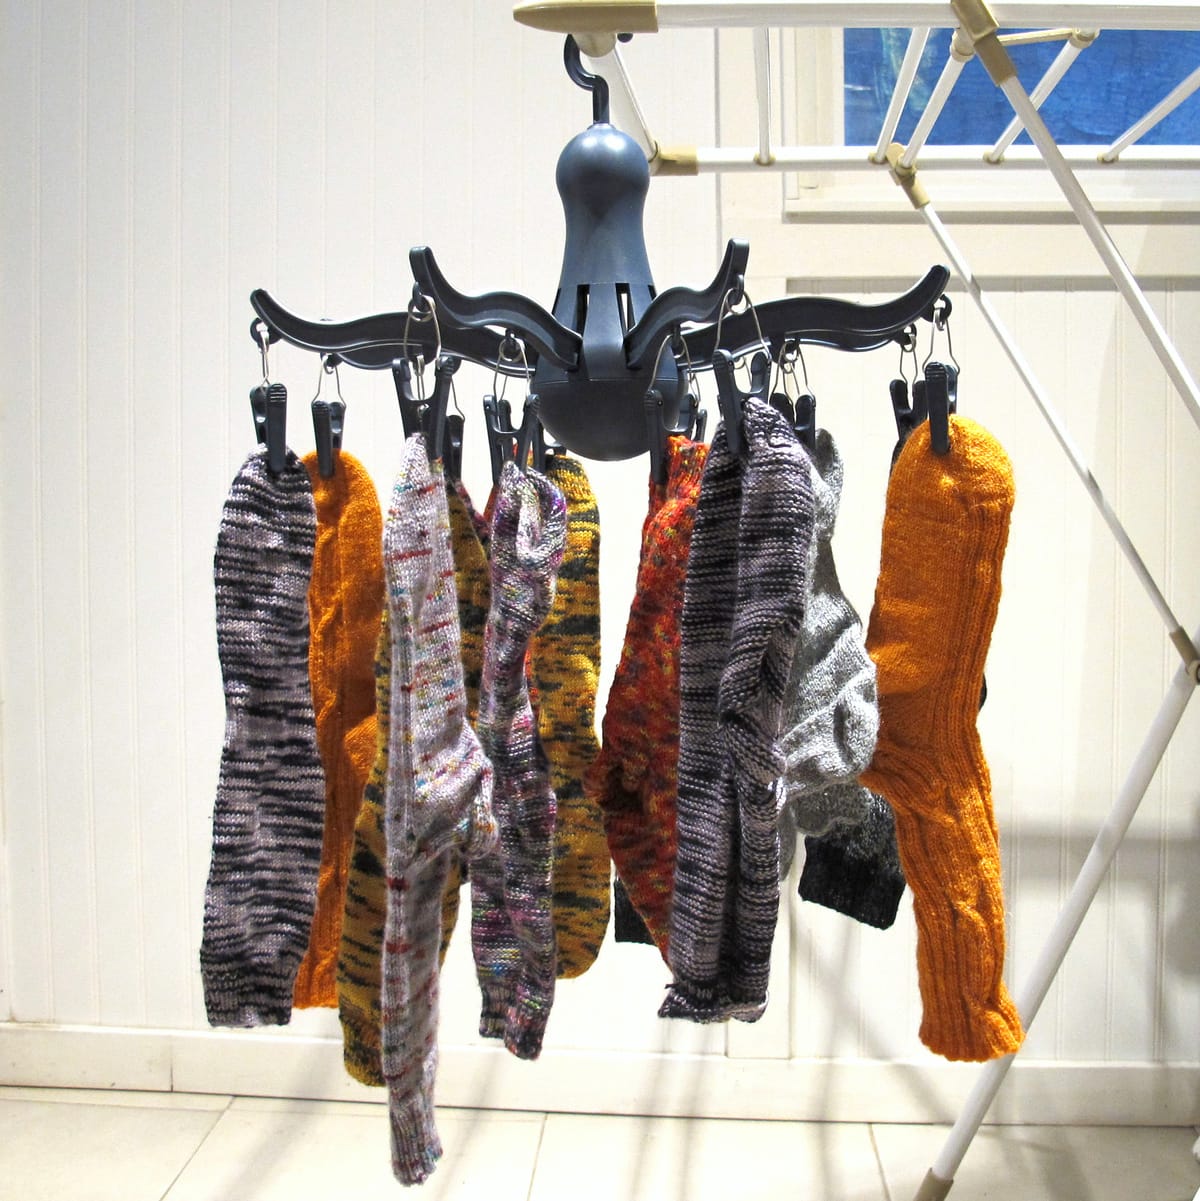 Image description: Several pairs of socks hanging by clips from a multi-pronged round hanger.